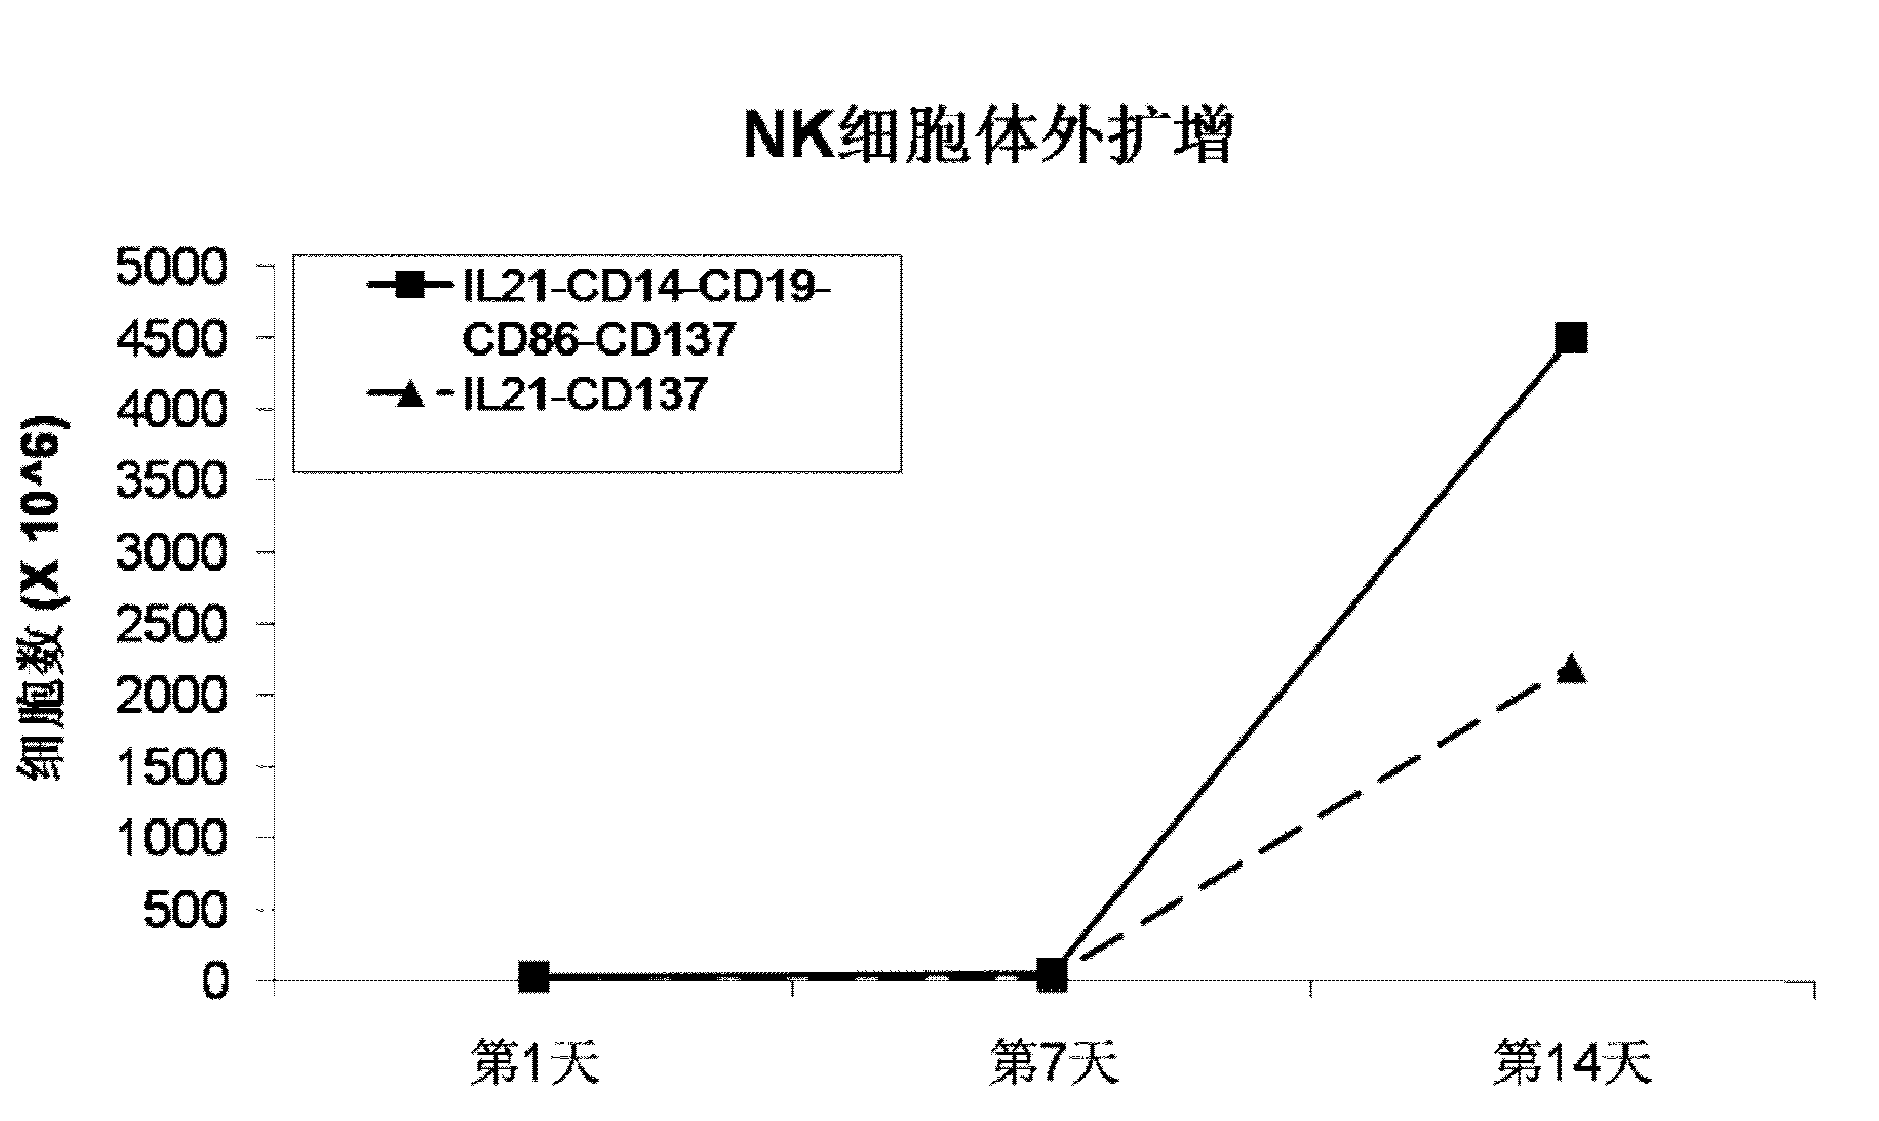 Method for amplification and activation of NK cells by K562 cells